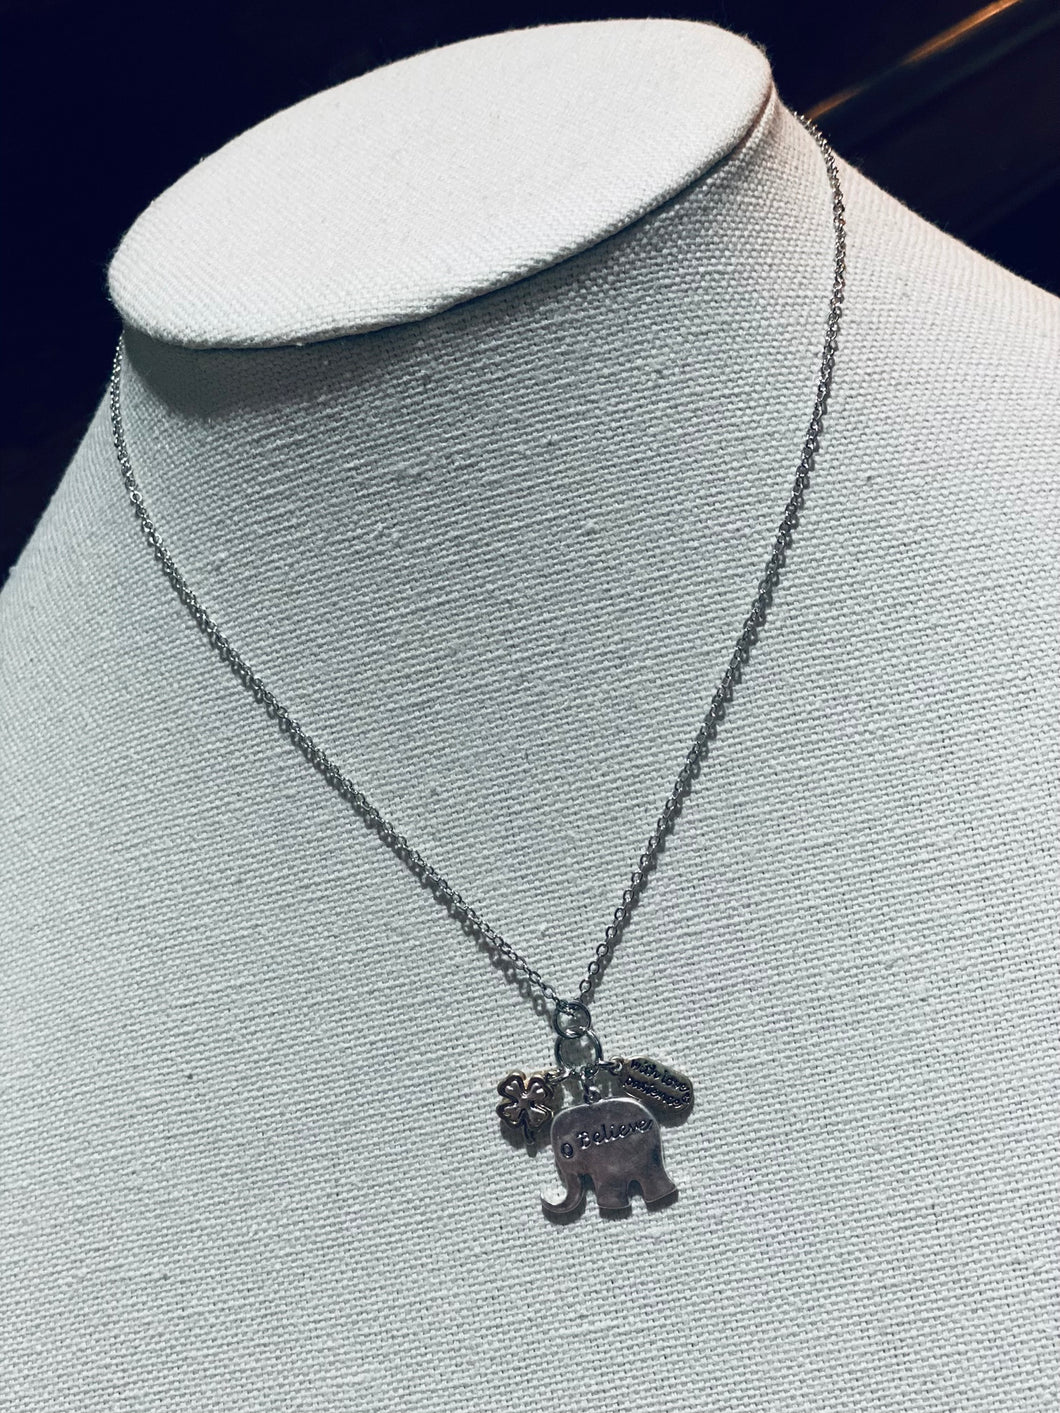 Elephant Necklace with Charms